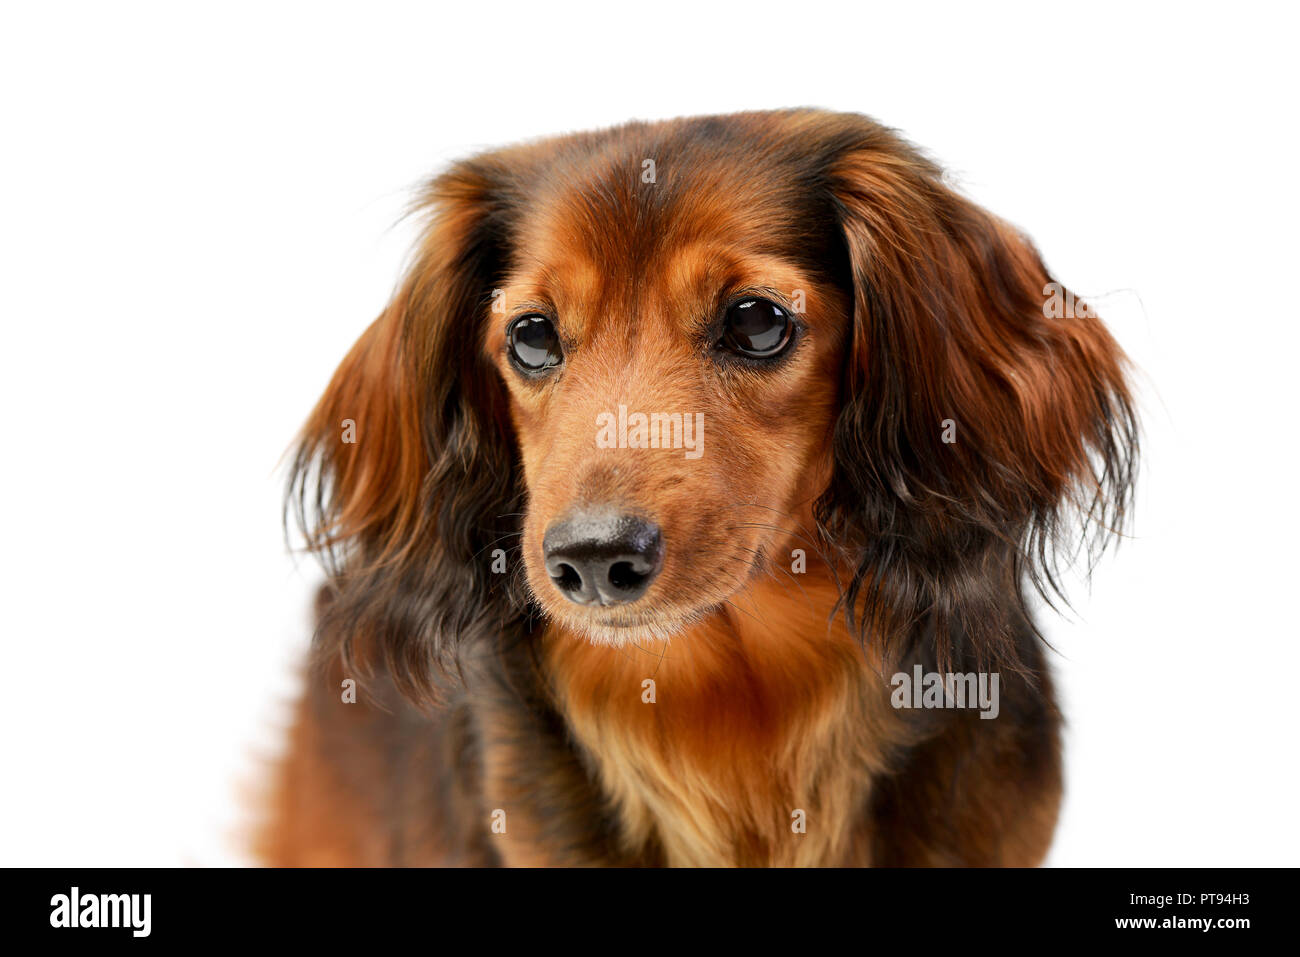 Portrait of an adorable longhaired Dachshund, studio shot, isolated on white. Stock Photo